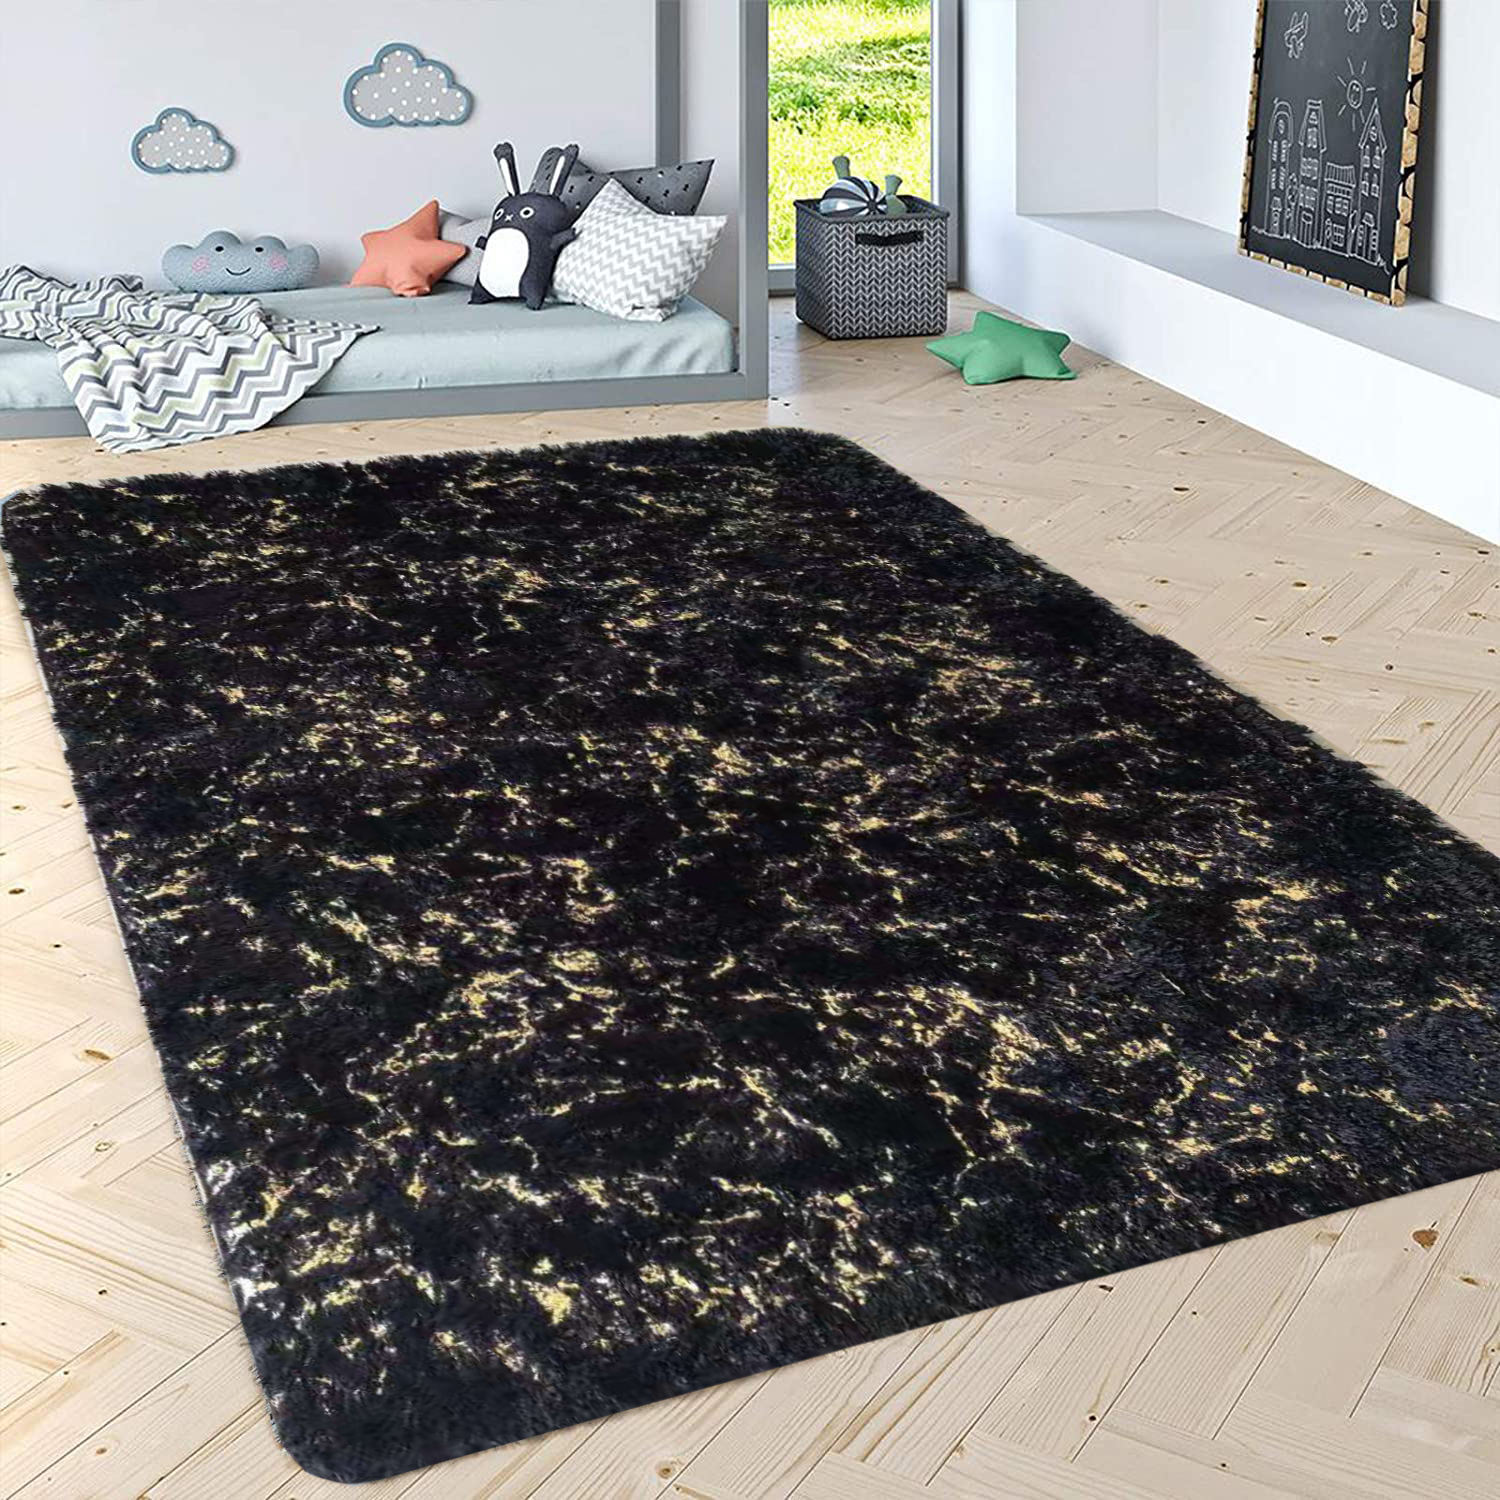 Amazon Hot Selling Shaggy Living Room Center Rug gold Silver Silver blocking Comfy Floor Rug Area Carpet